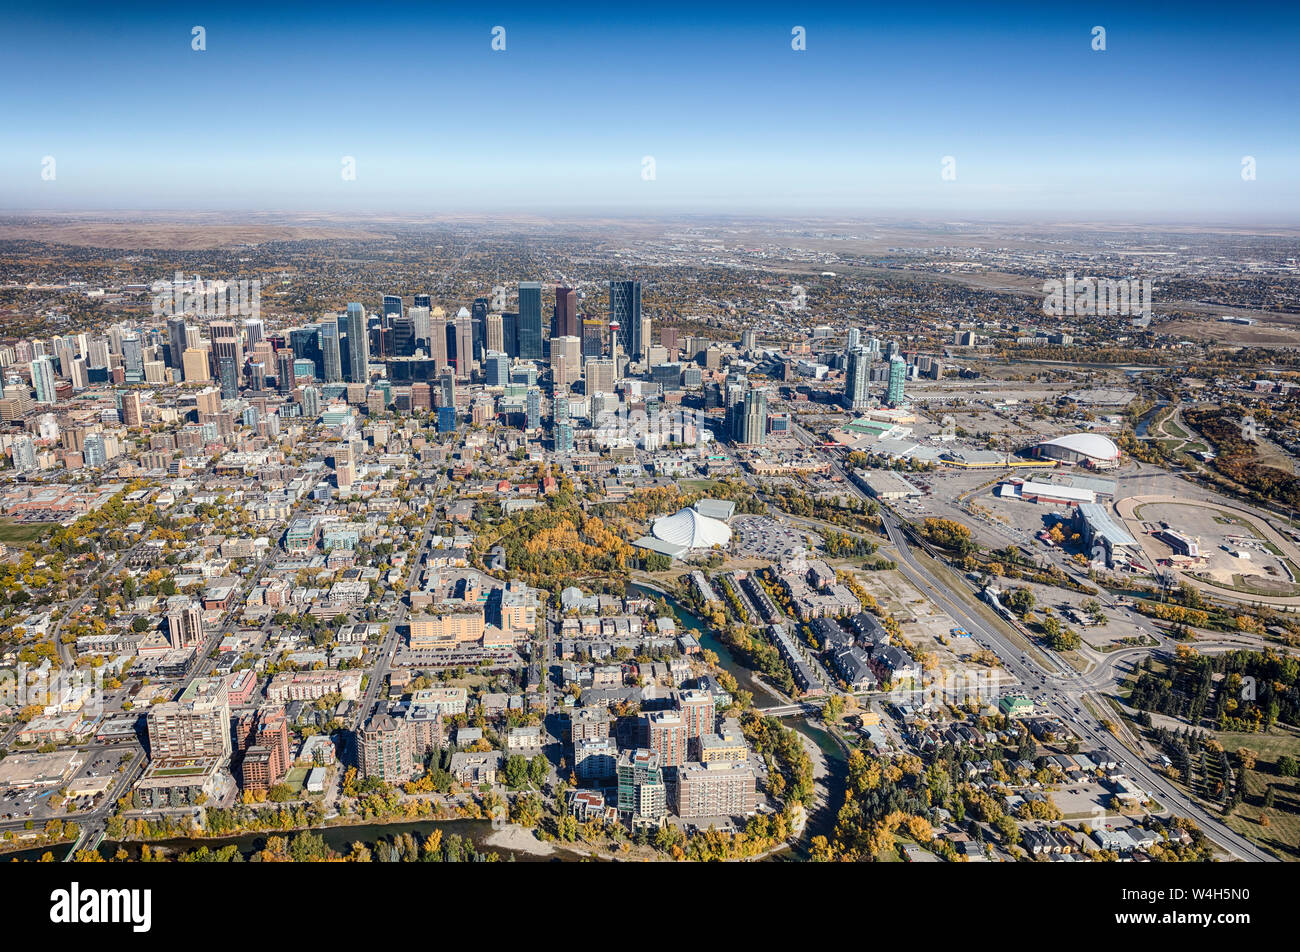 Aerial view of the city of Calgary, Alberta Canada featuring the Saddledome and Stampede grounds. Stock Photo